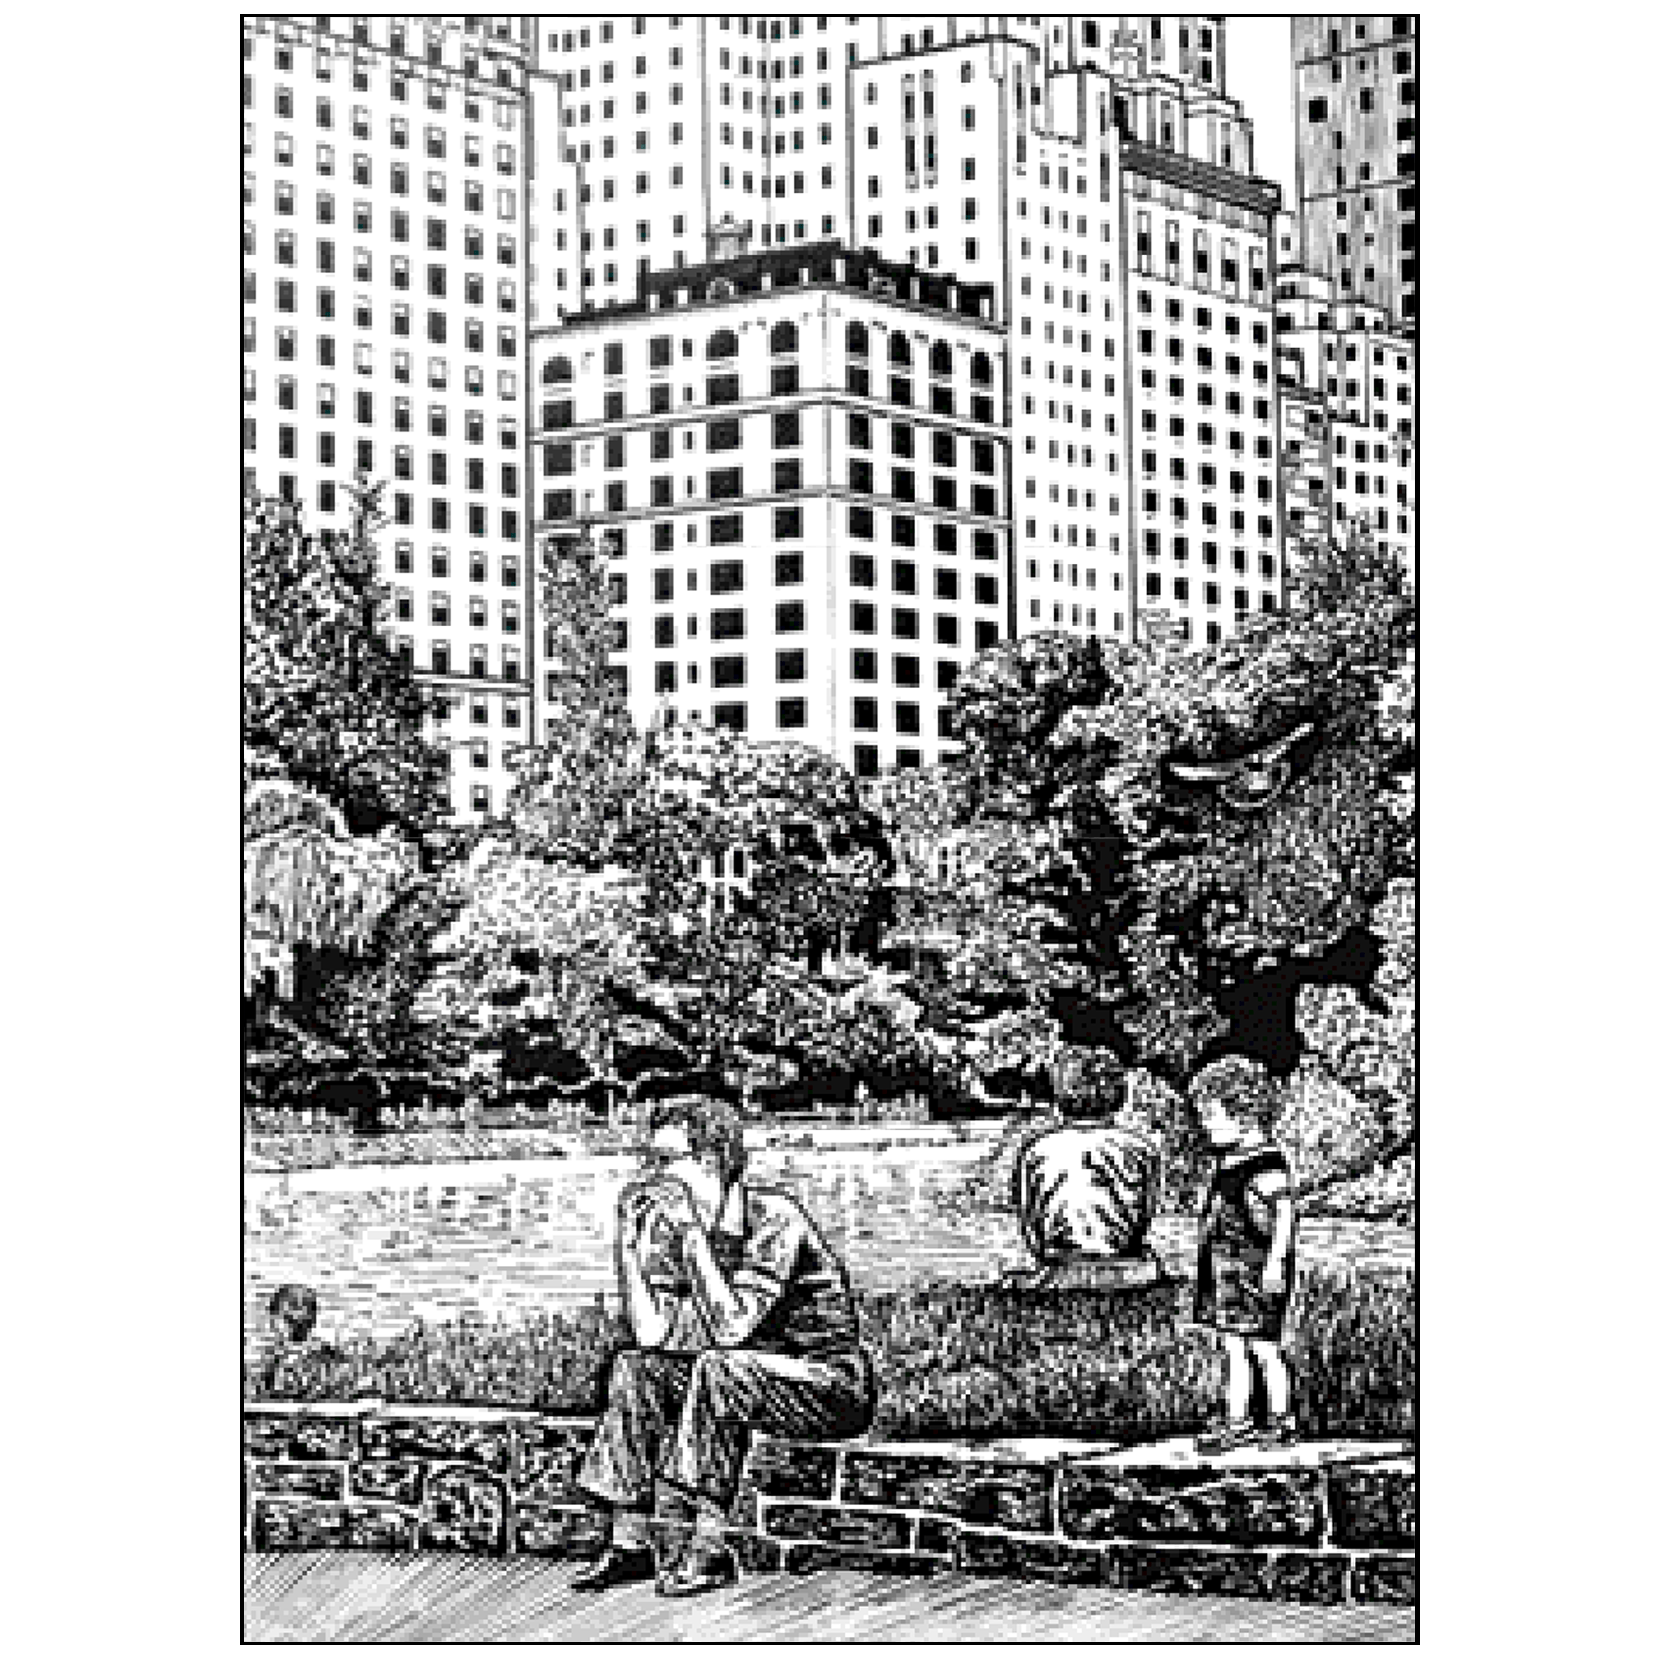 NYC Note Card 14 - Central Park ⋆ IPV Studio